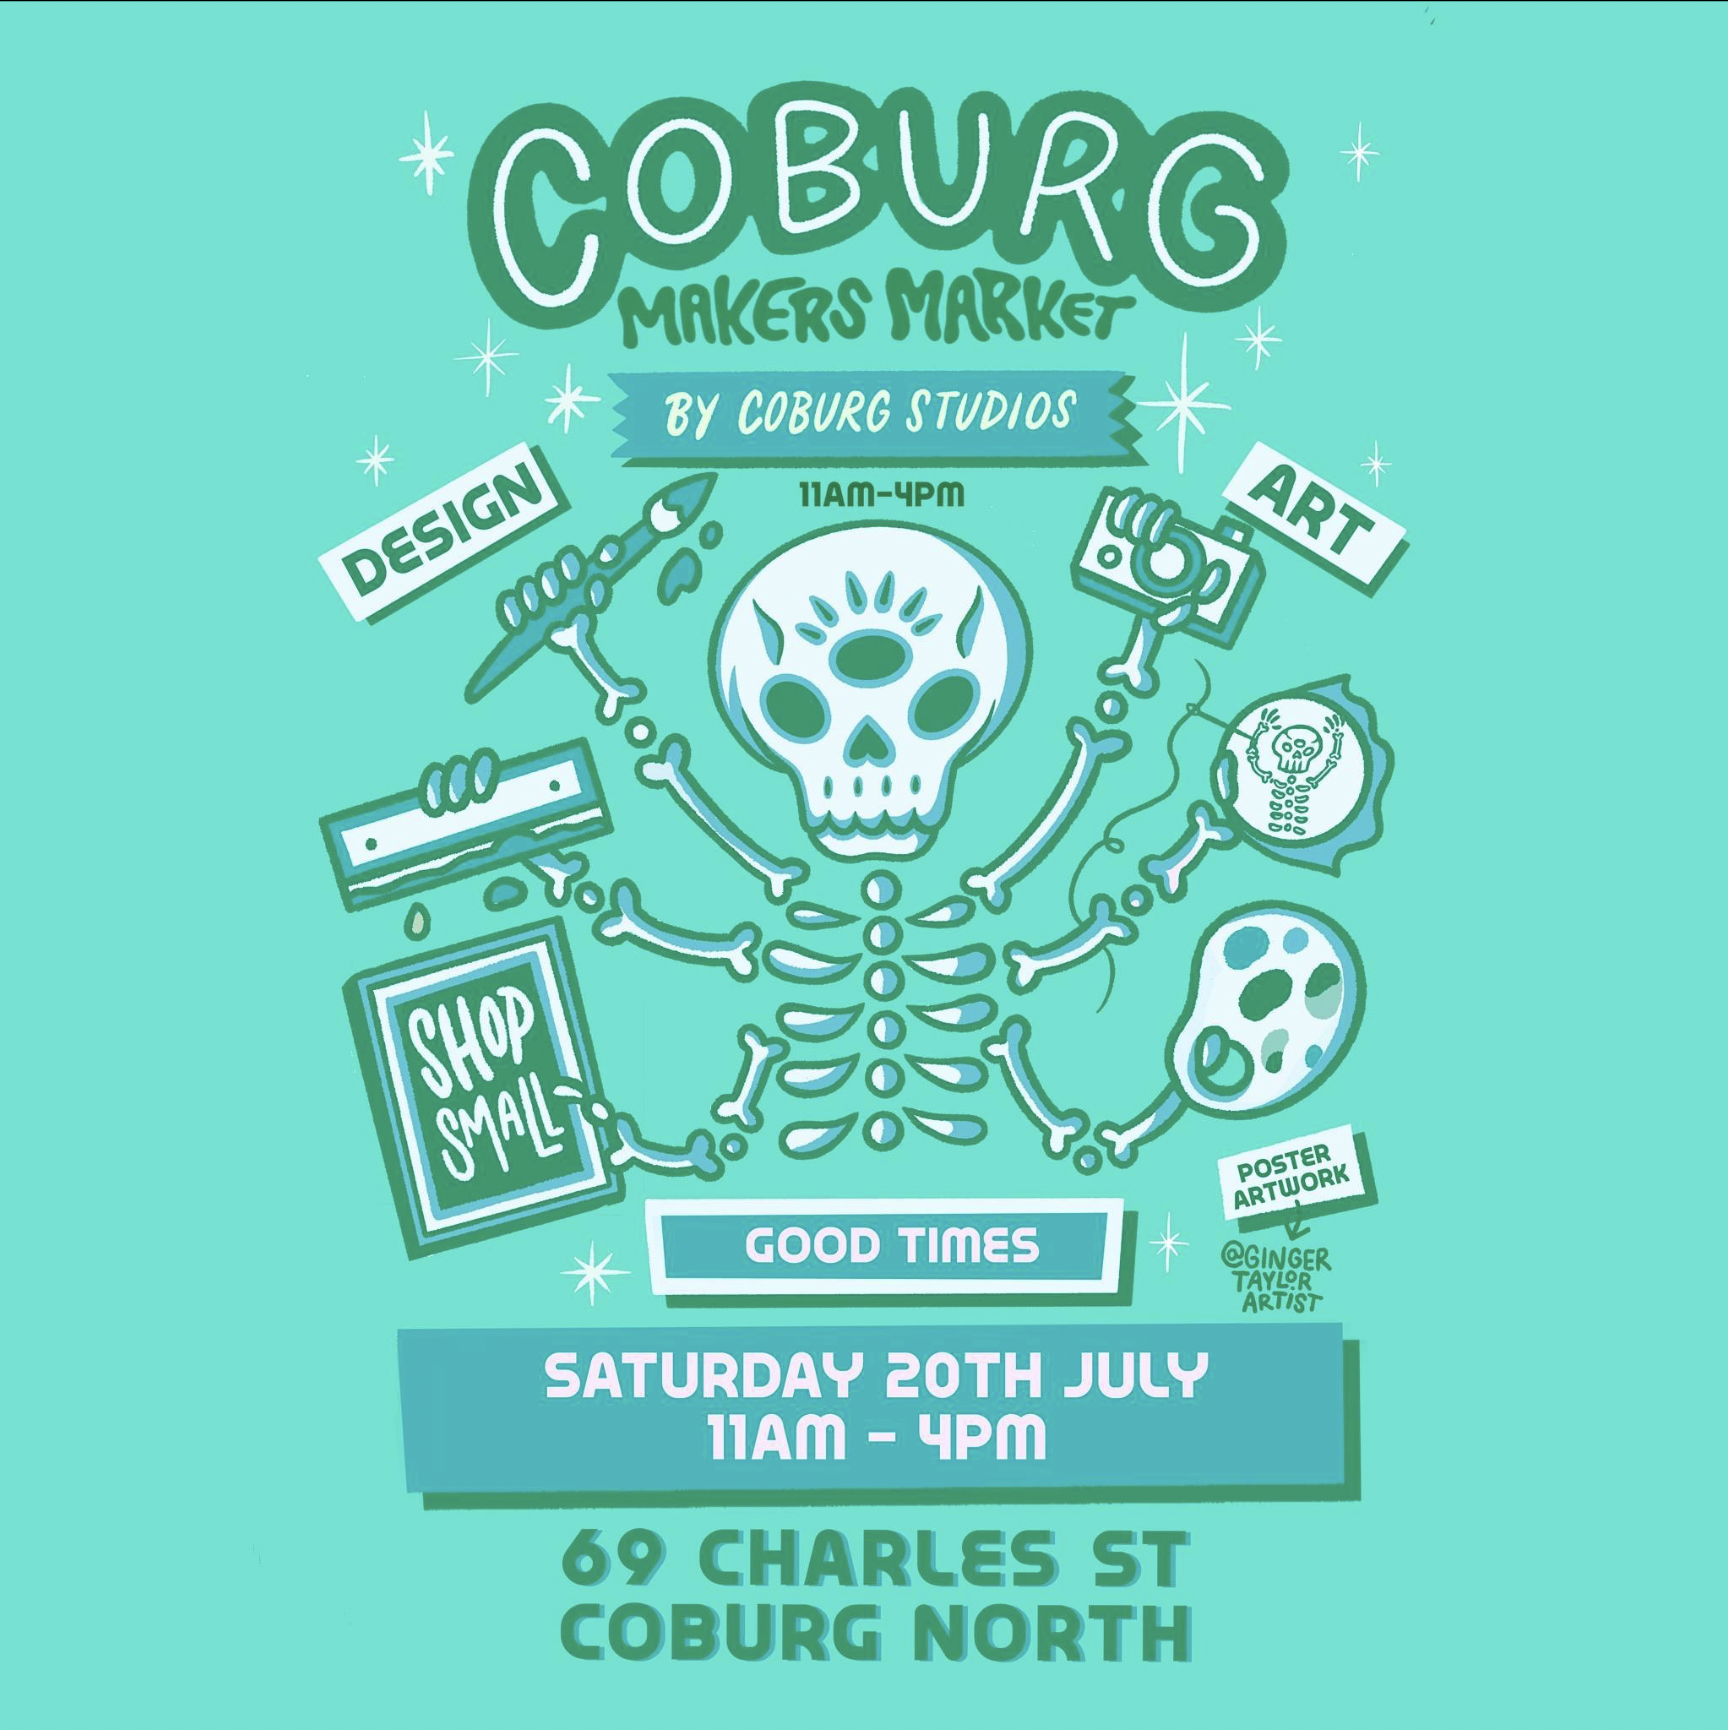 The image is a poster for the Coburg Makers Market by Coburg Studios. The background is a bright sea foam green color. At the top, the text reads 